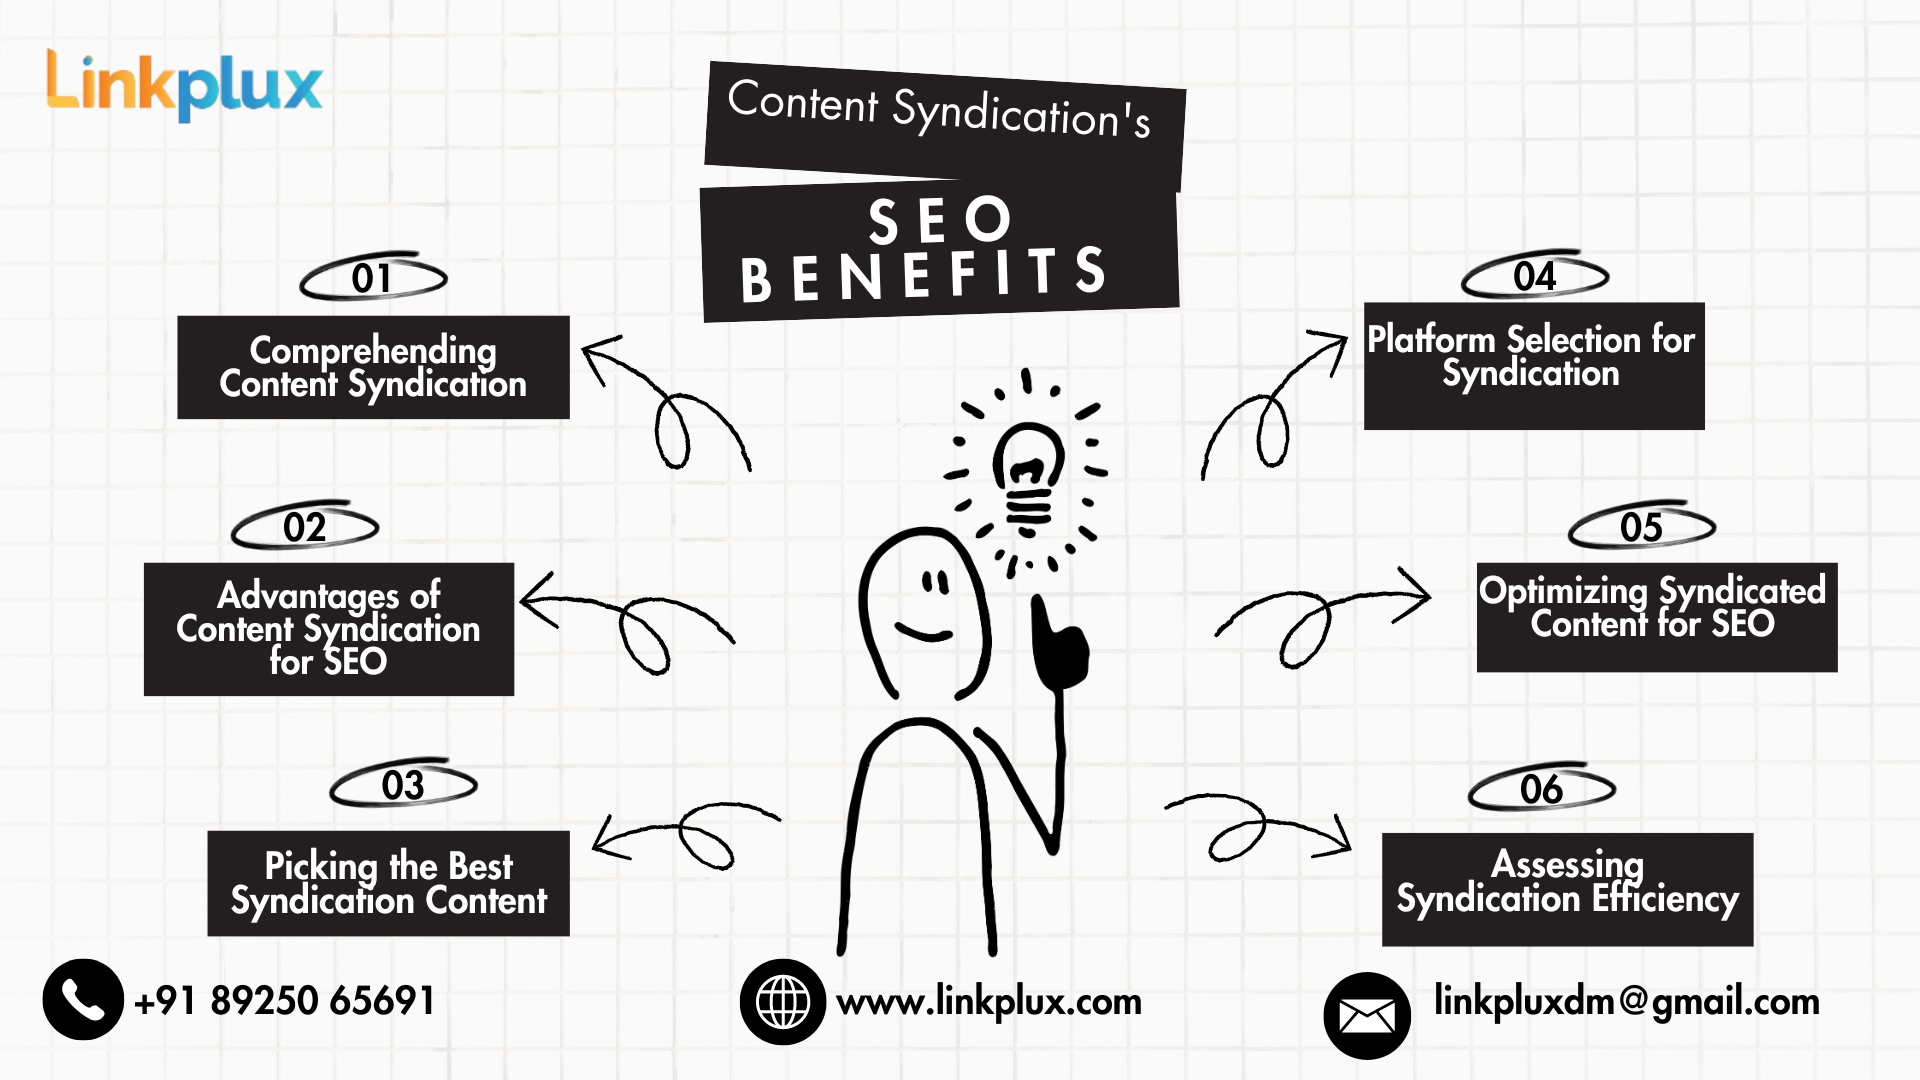 How to Increase Your Reach with Content Syndication's SEO Benefits